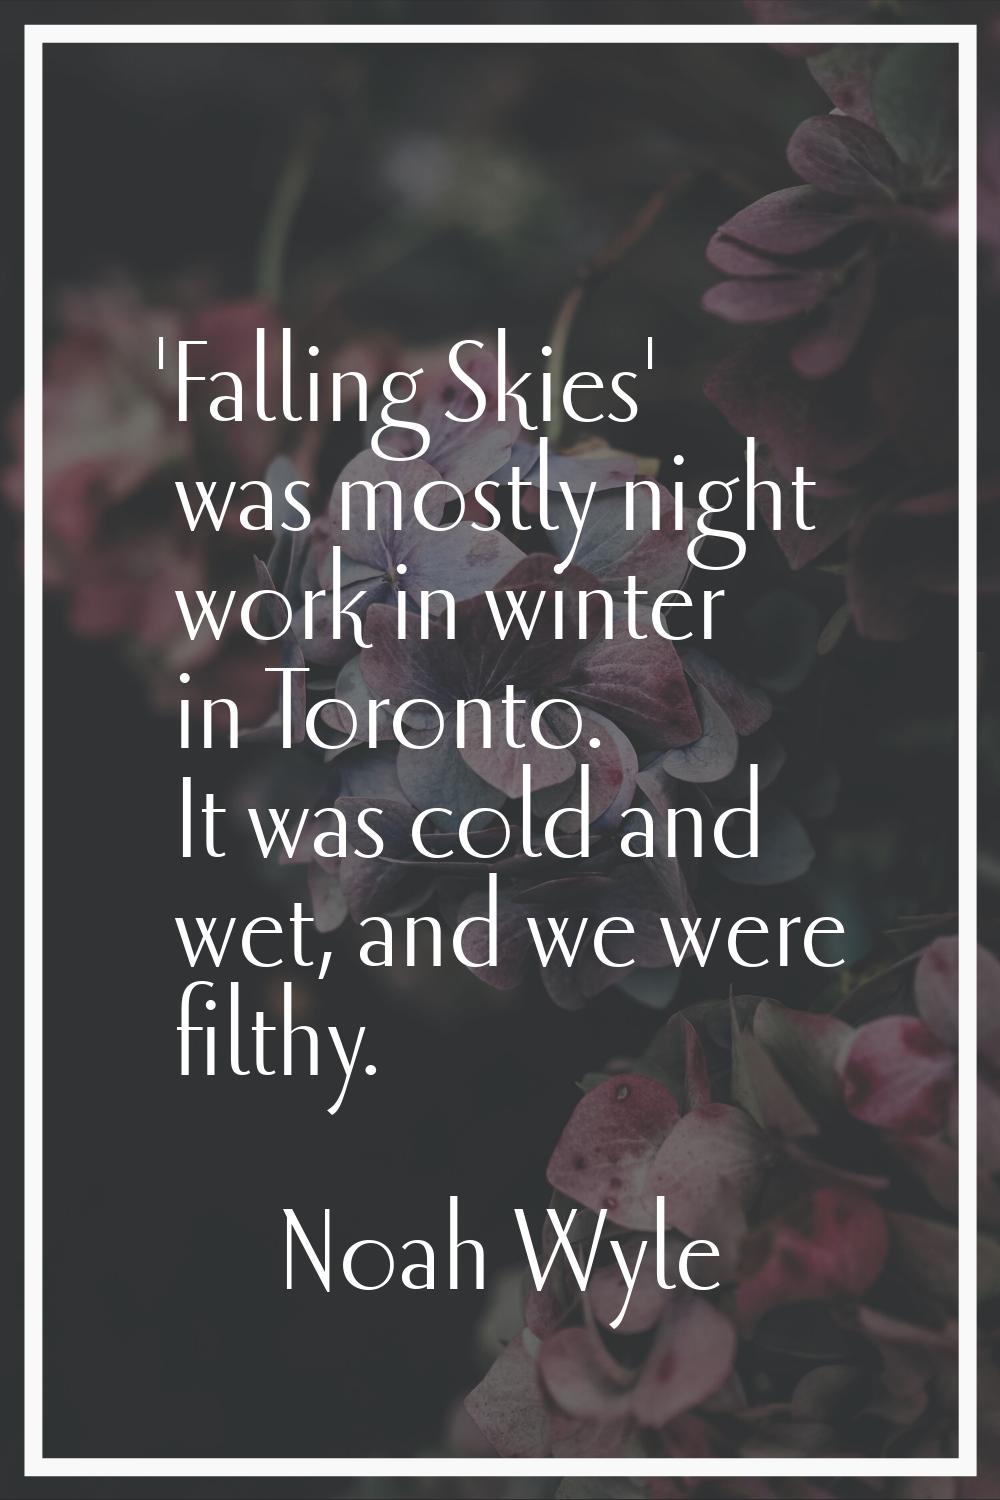 'Falling Skies' was mostly night work in winter in Toronto. It was cold and wet, and we were filthy